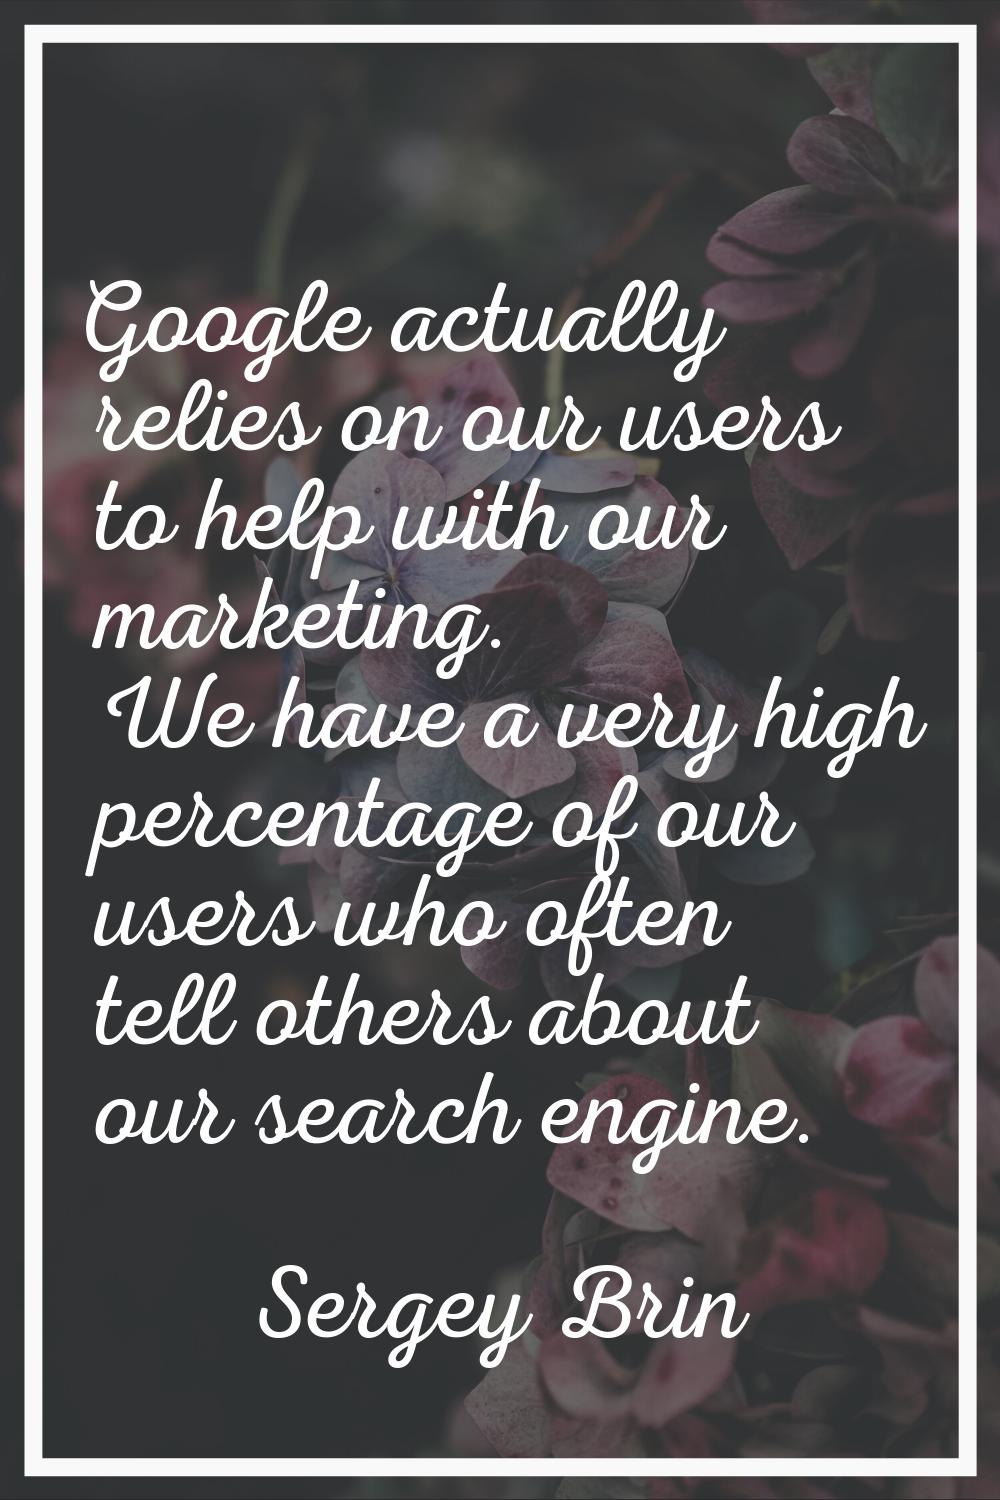 Google actually relies on our users to help with our marketing. We have a very high percentage of o